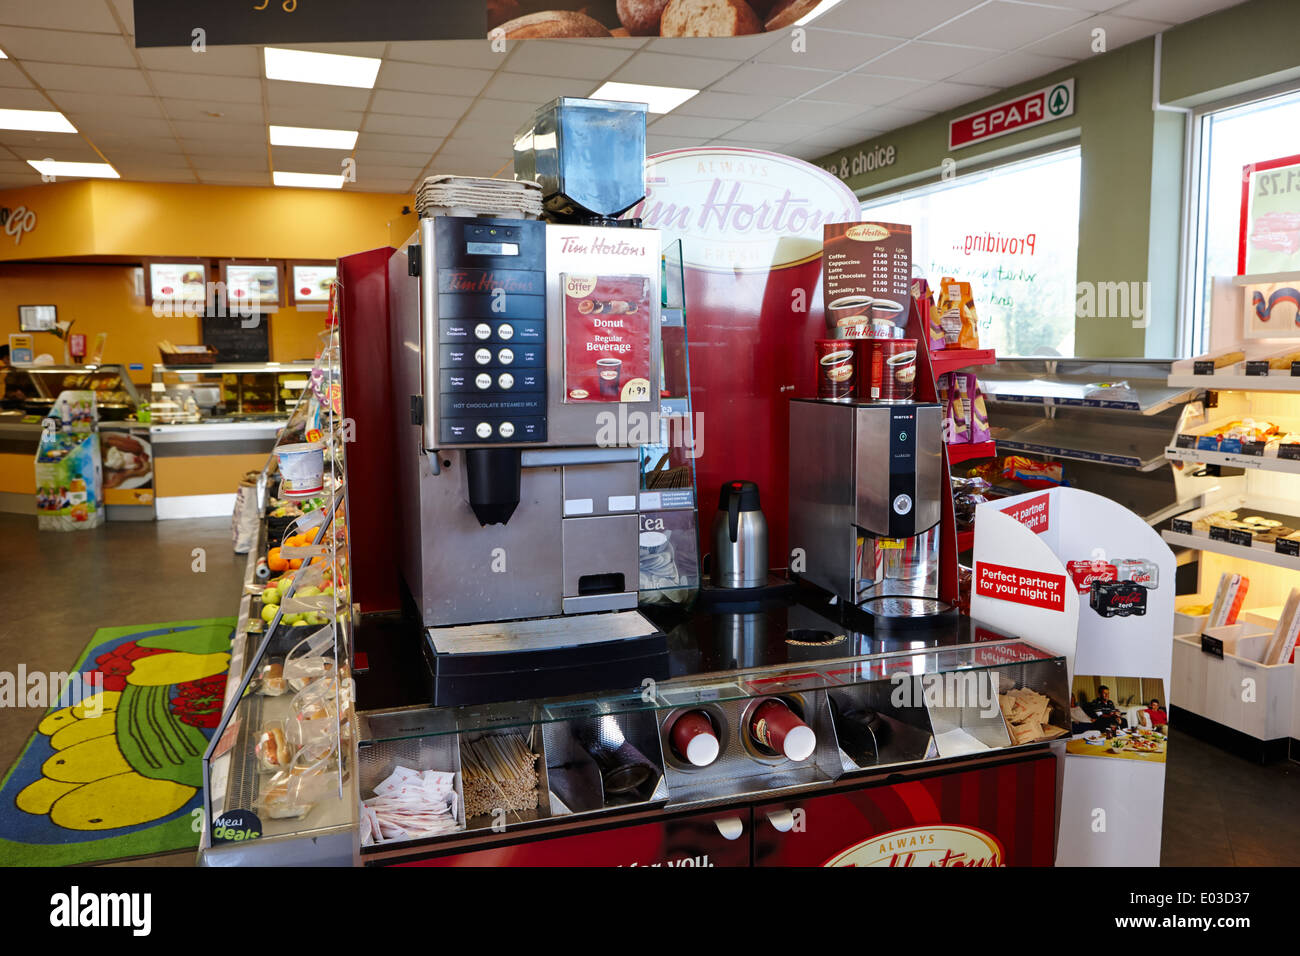 tim hortons coffee machine in a filling station convenience store in northern ireland Stock Photo